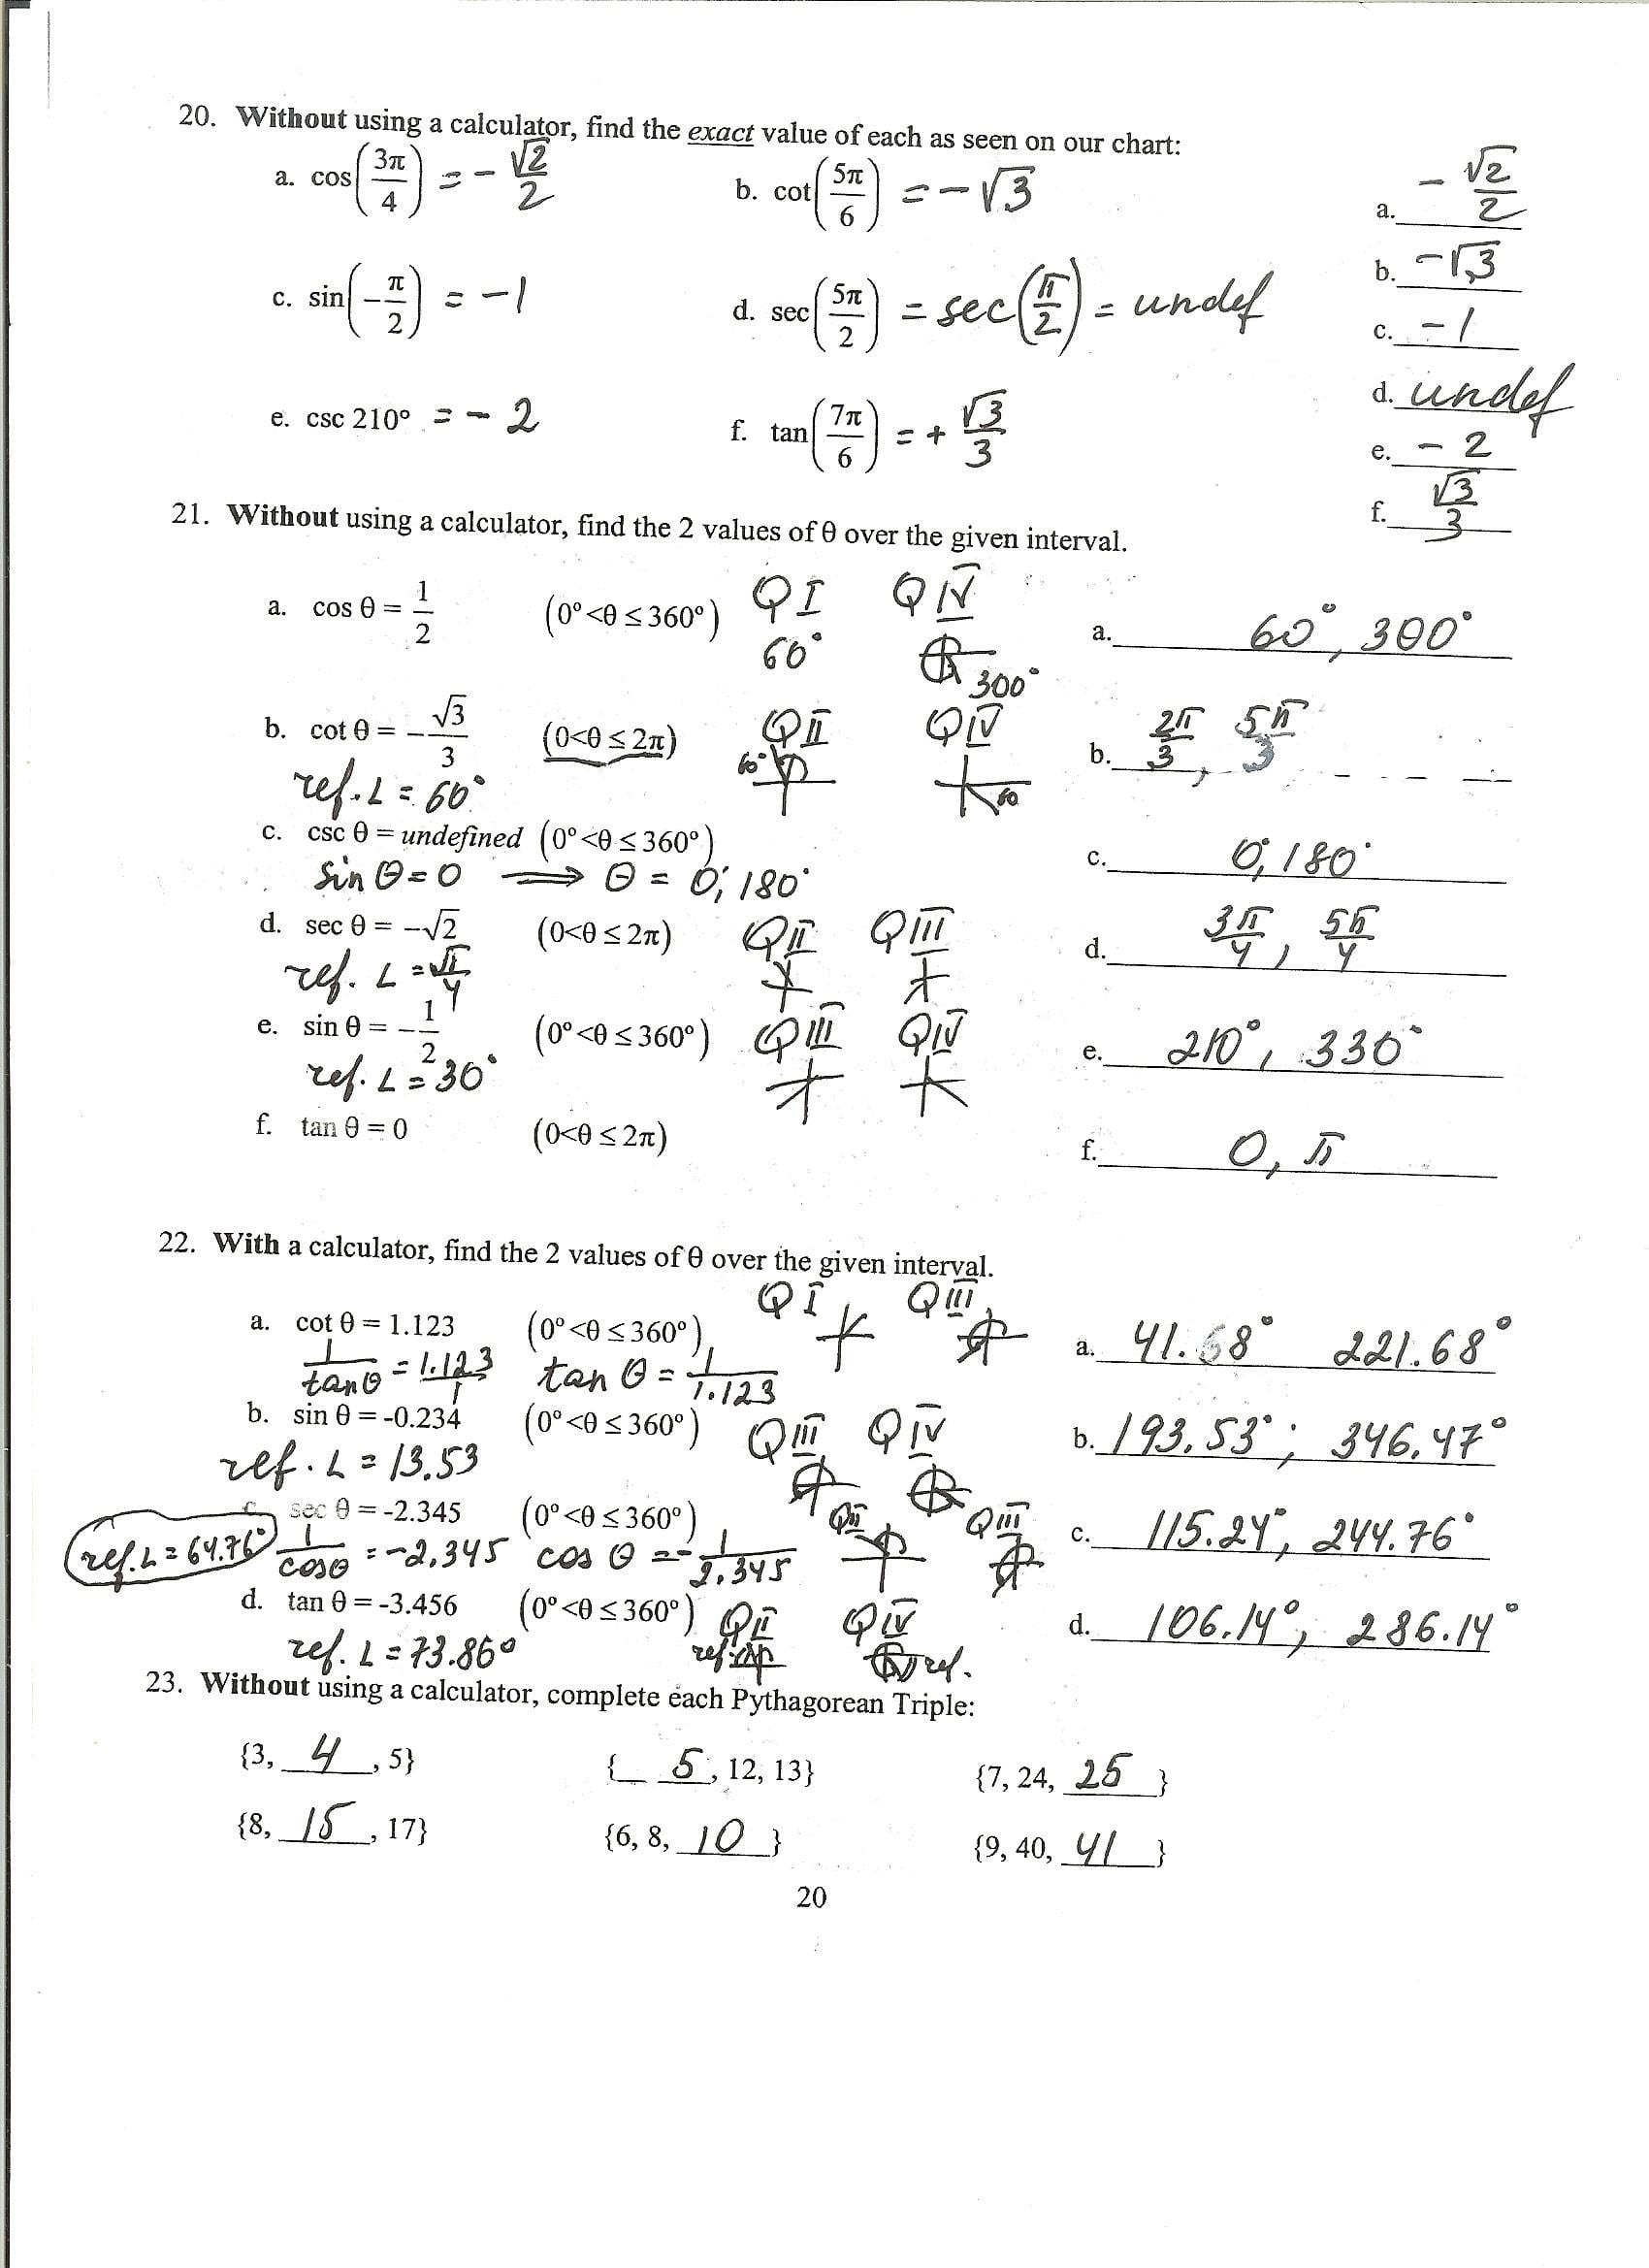 Precalculus Honors For Precalculus Trig Day 2 Exact Values Worksheet Answers